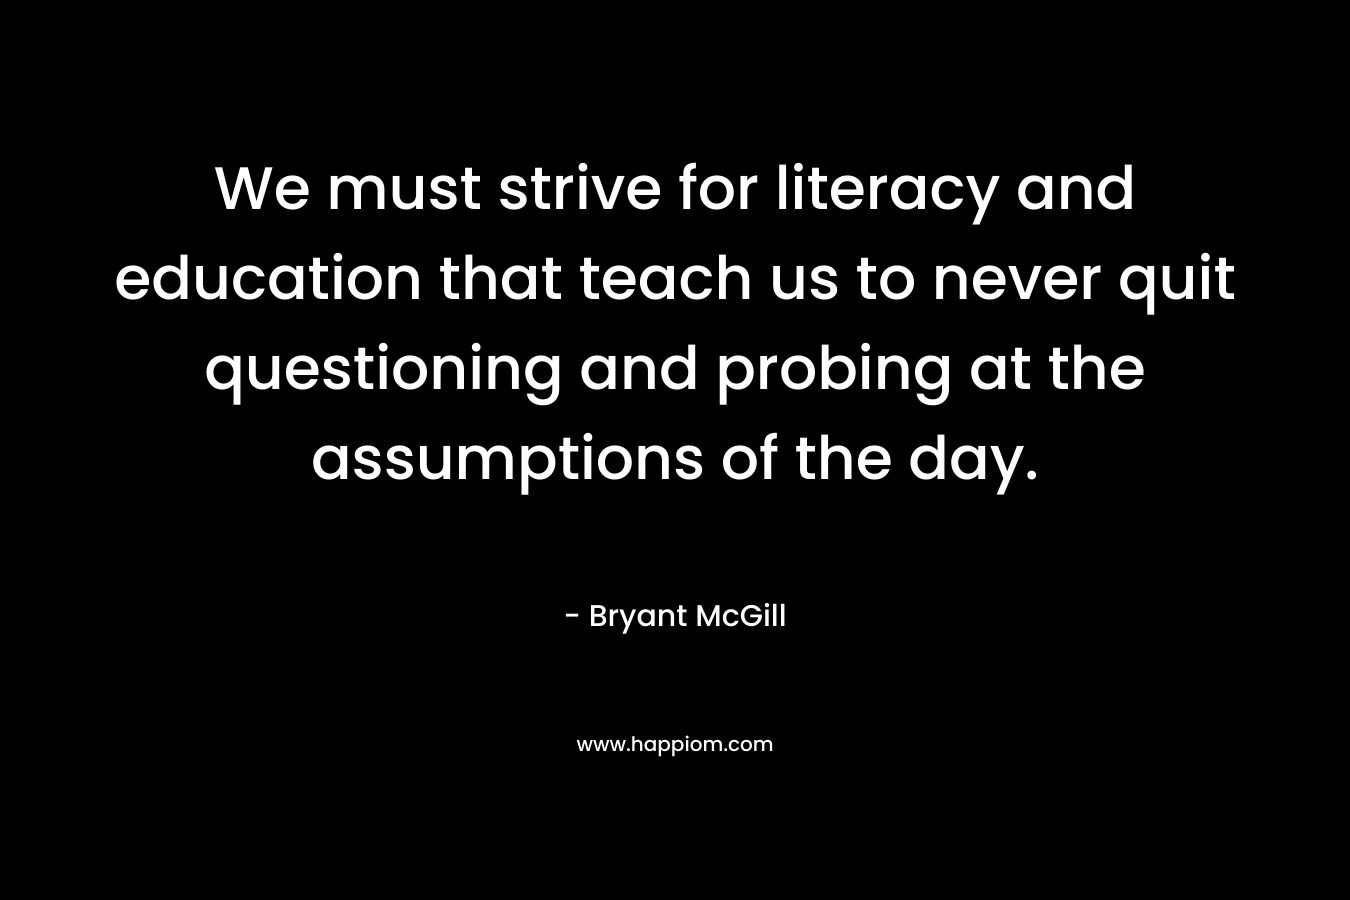 We must strive for literacy and education that teach us to never quit questioning and probing at the assumptions of the day.